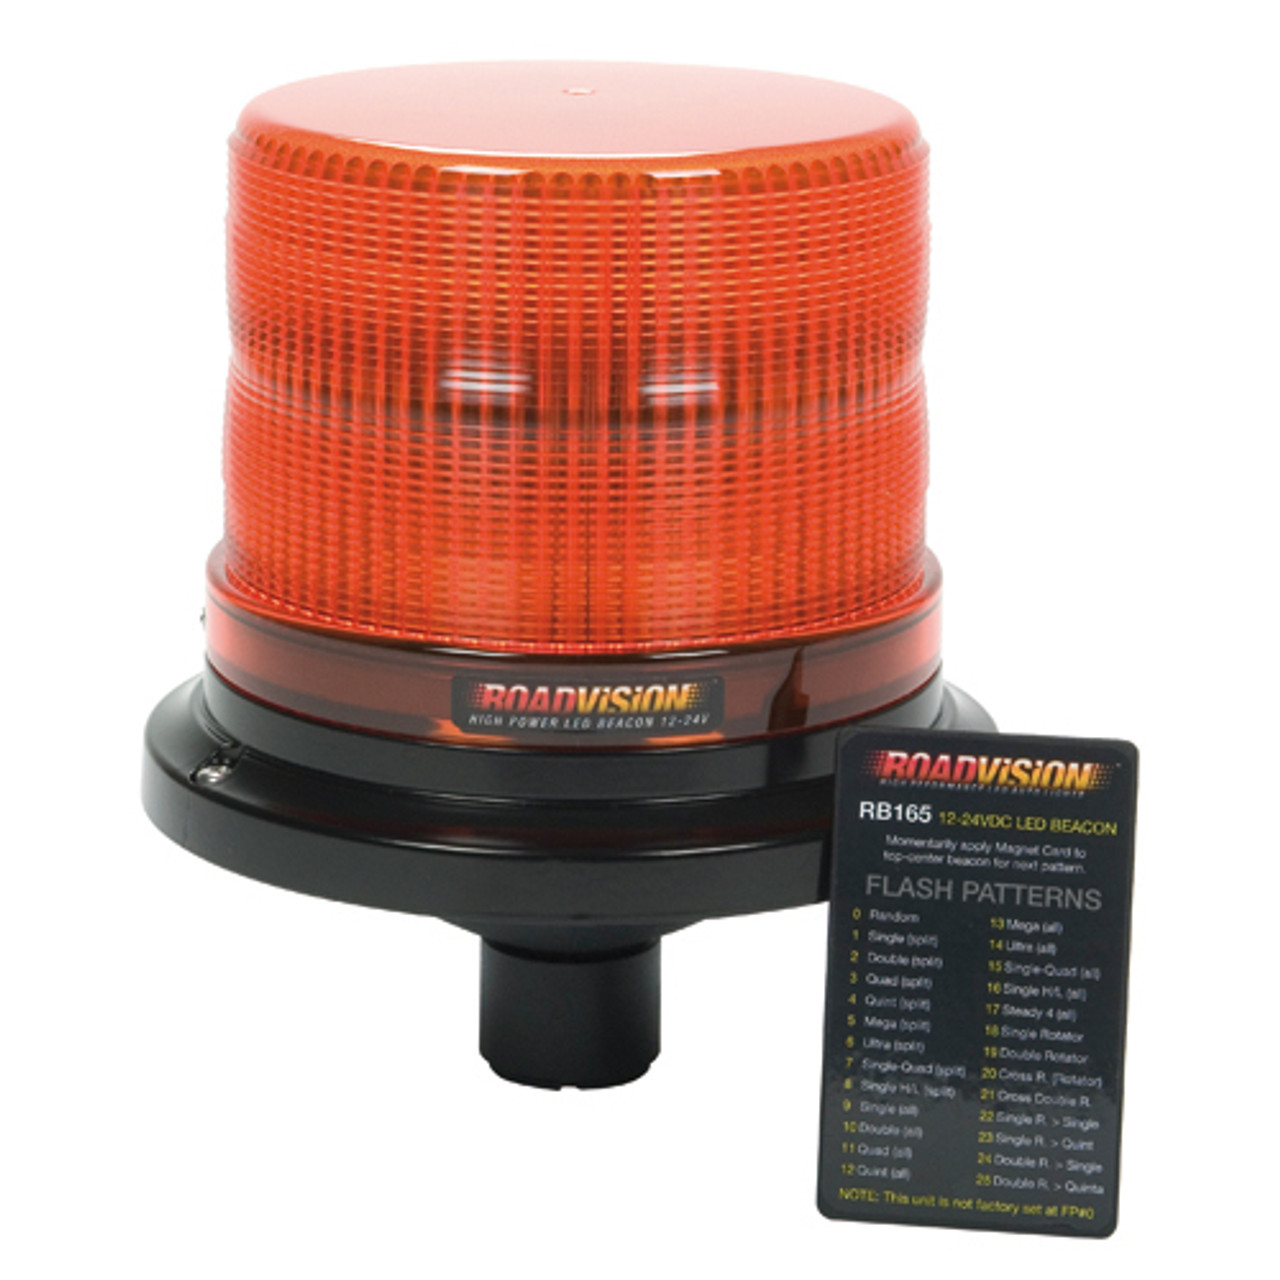 RB165PY - Heavy Duty Safety, Emergency Beacon. 24 watt. Rotation and Strobe Functions. Pole Mount. Class 1. Ultimate LED